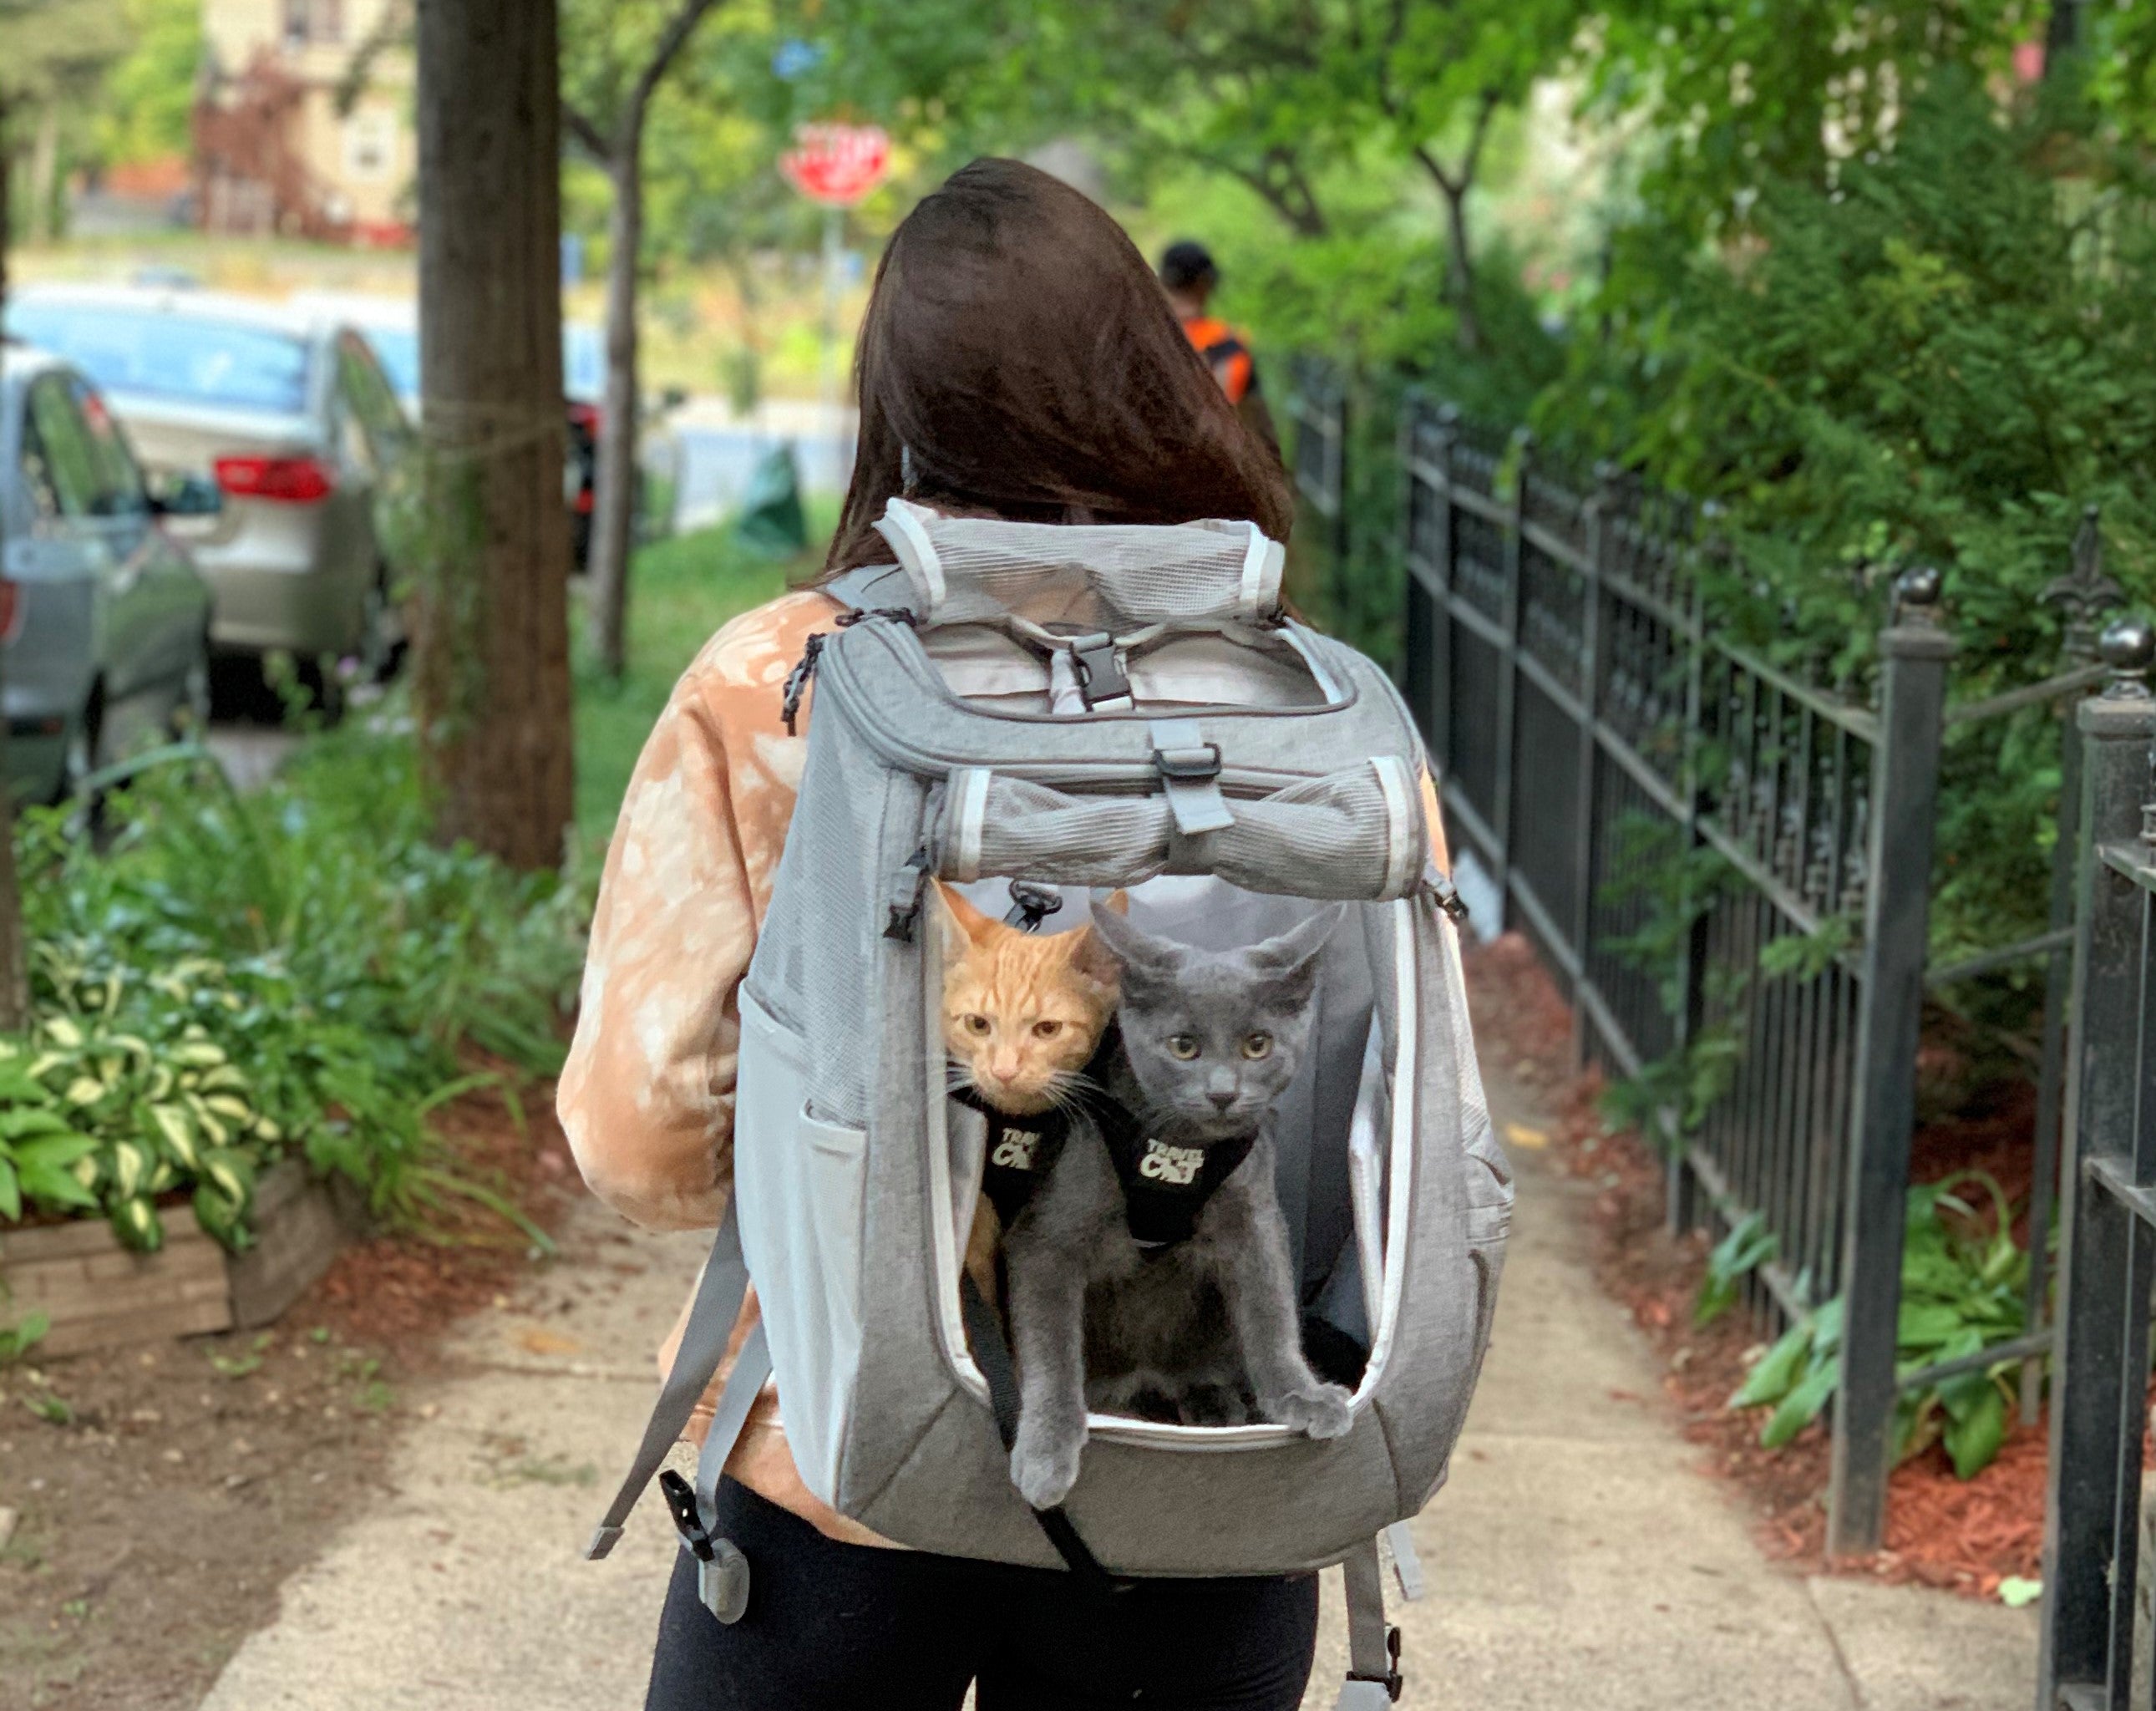 Cat Backpack that Fits 2 Cats (or lots of kittens): The Fat Cat by Your Cat Backpack